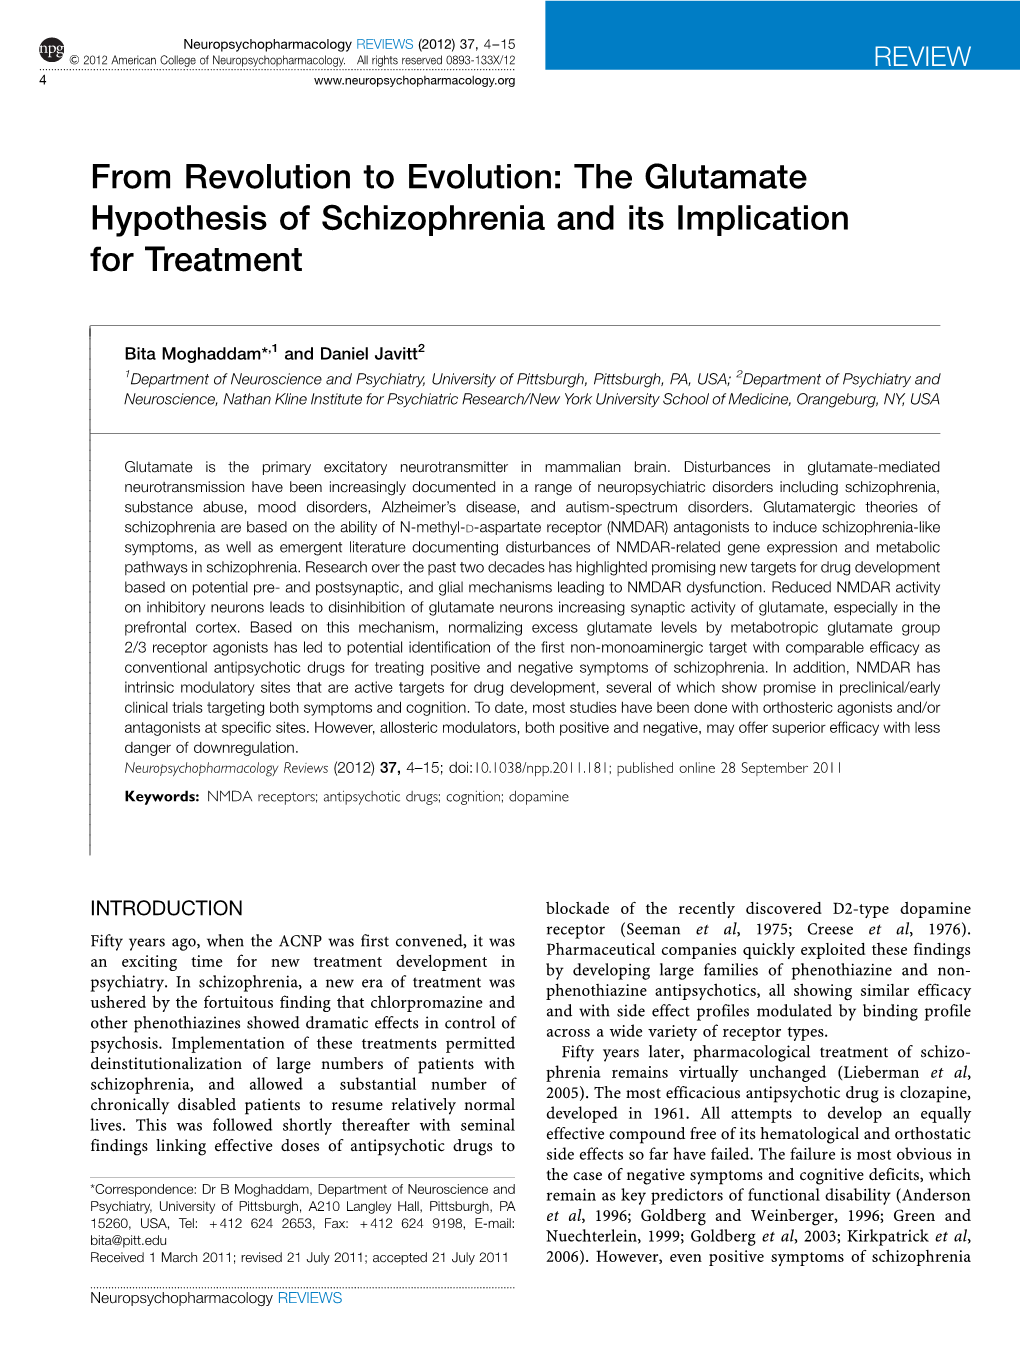 The Glutamate Hypothesis of Schizophrenia and Its Implication for Treatment